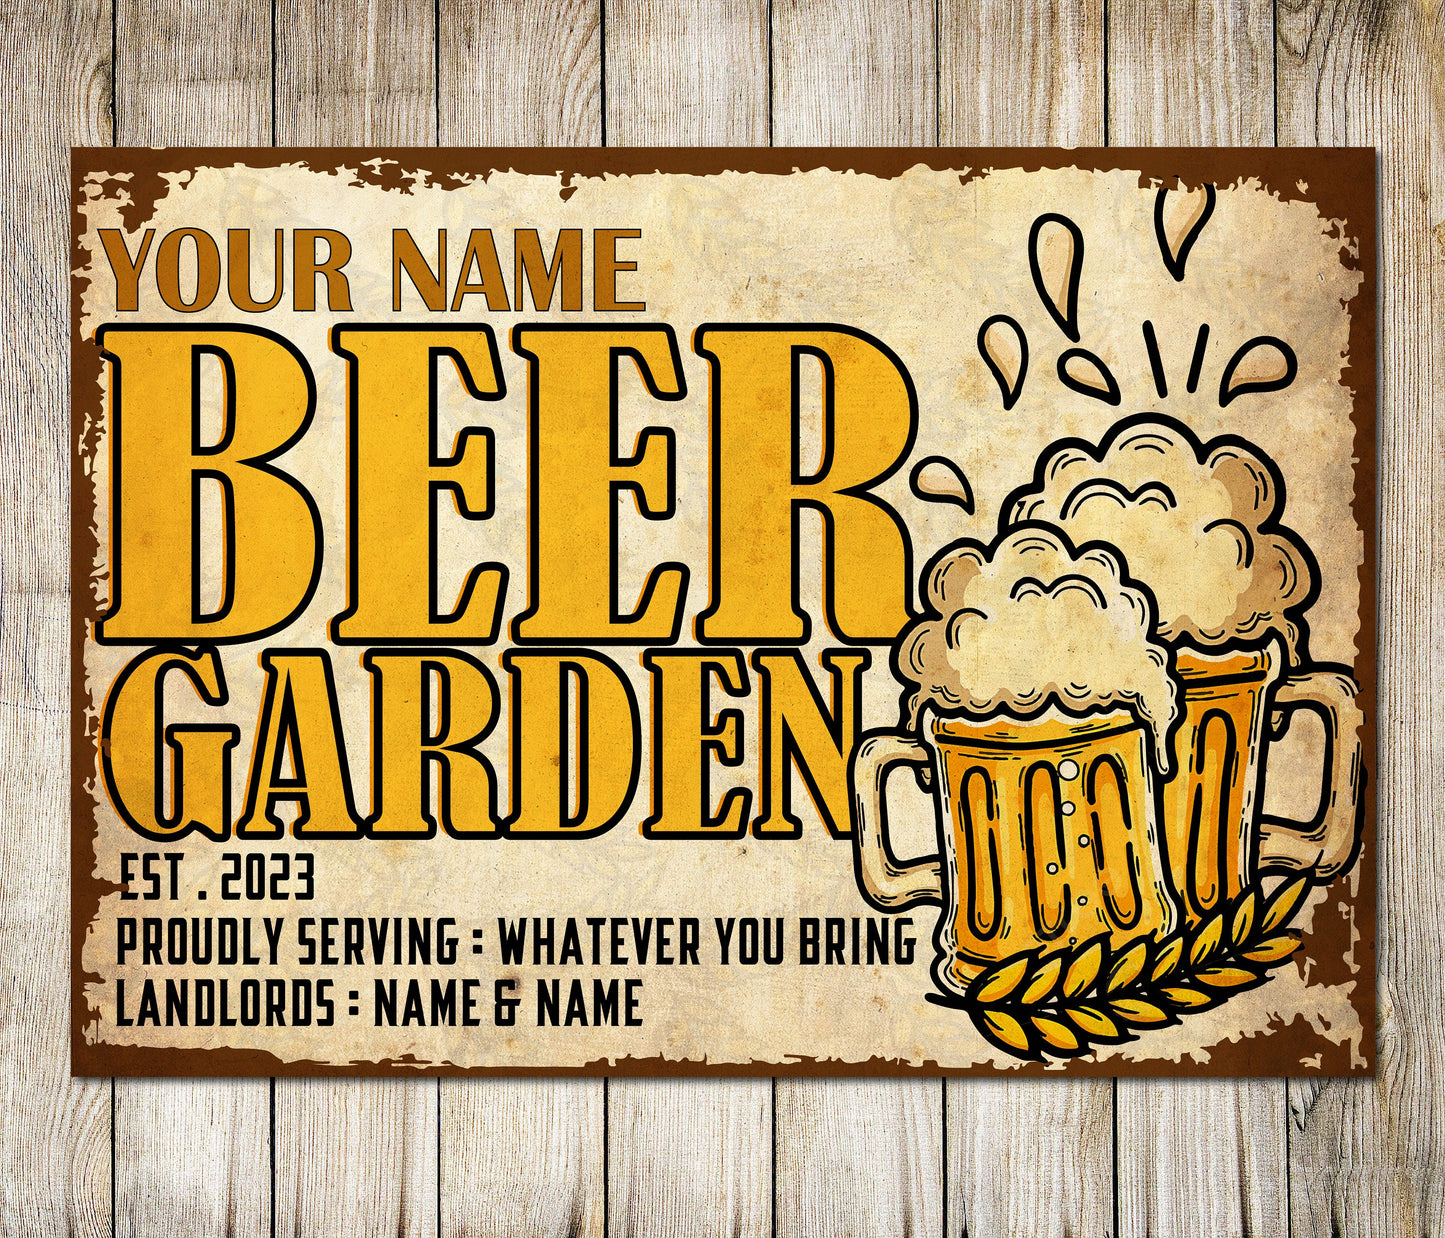 PERSONALISED Beer Garden Customized Classic Sign Decor Metal Plaque 0680-B